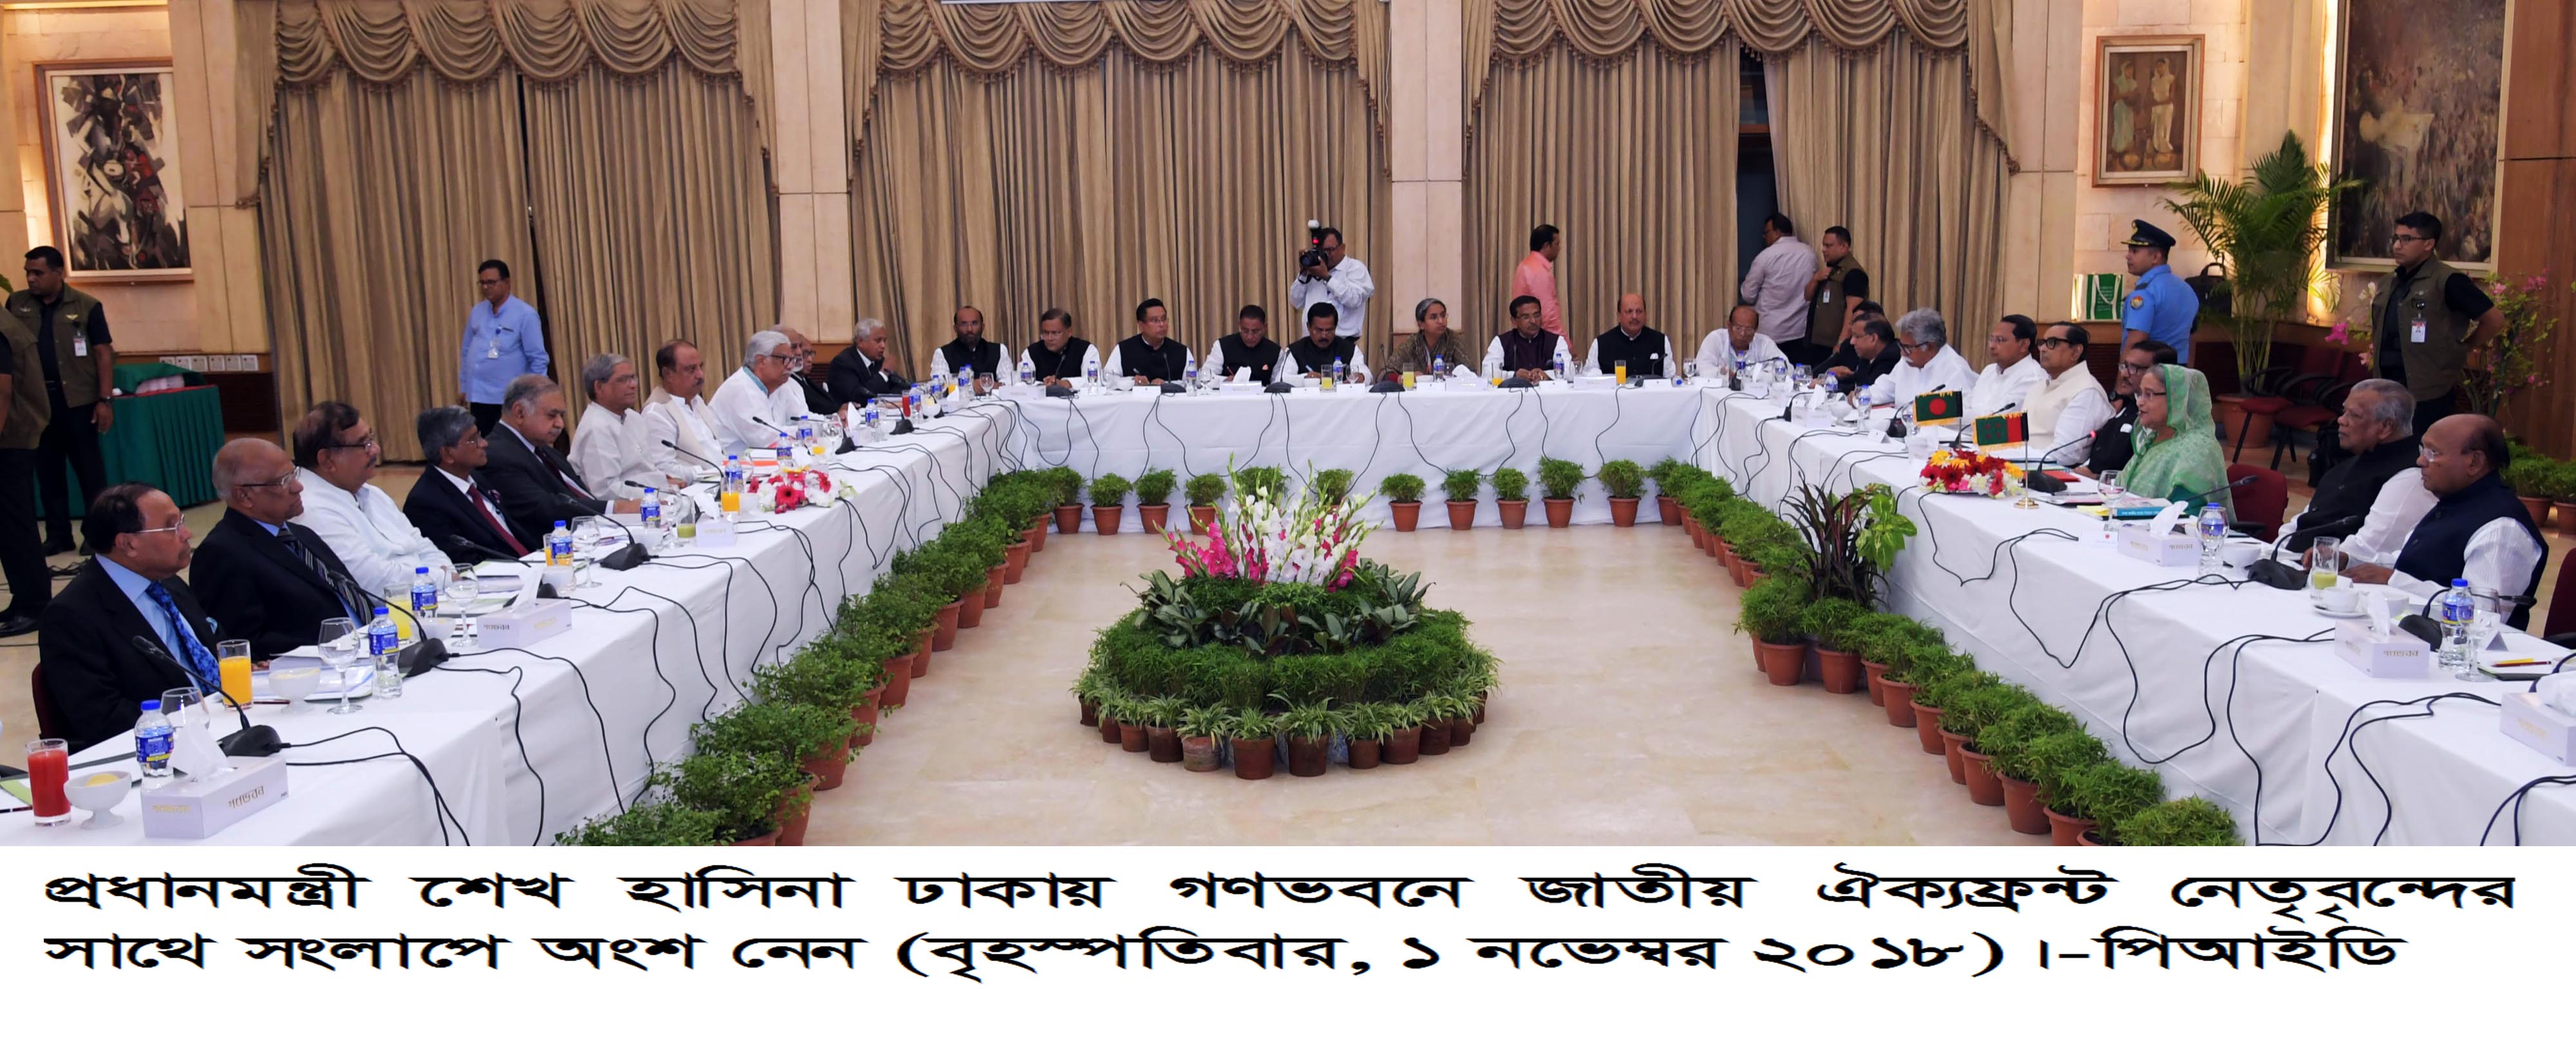 All need to work hard to create the nation: PM Hasina